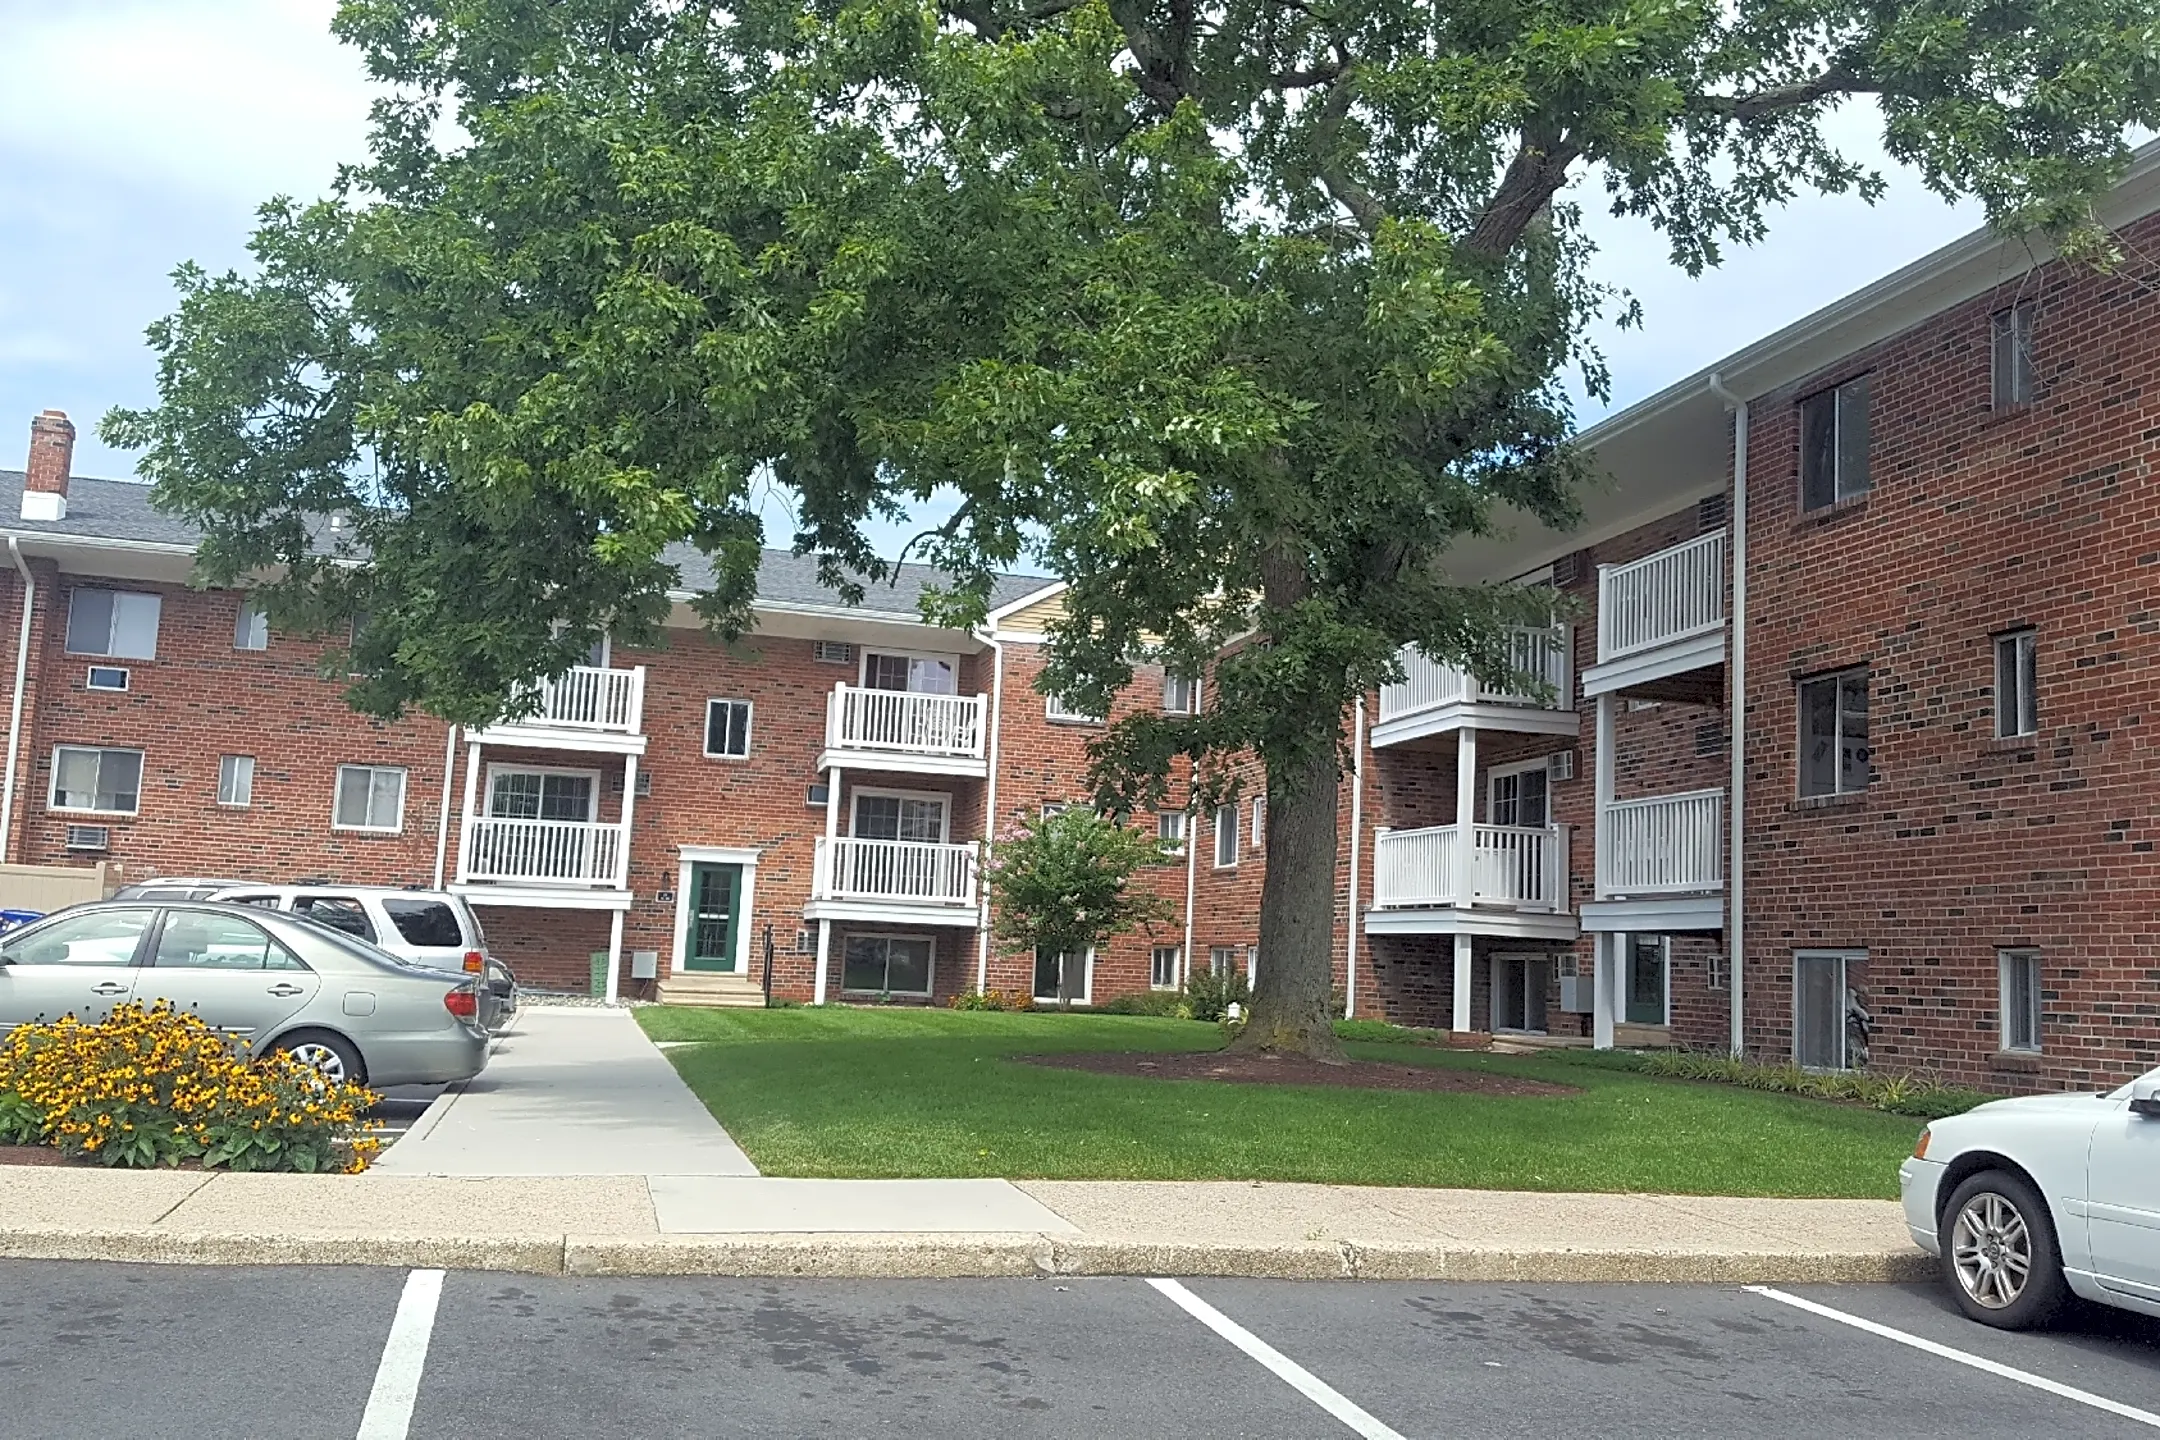 Pool - Bayview Court Apartments - Somers Point, NJ